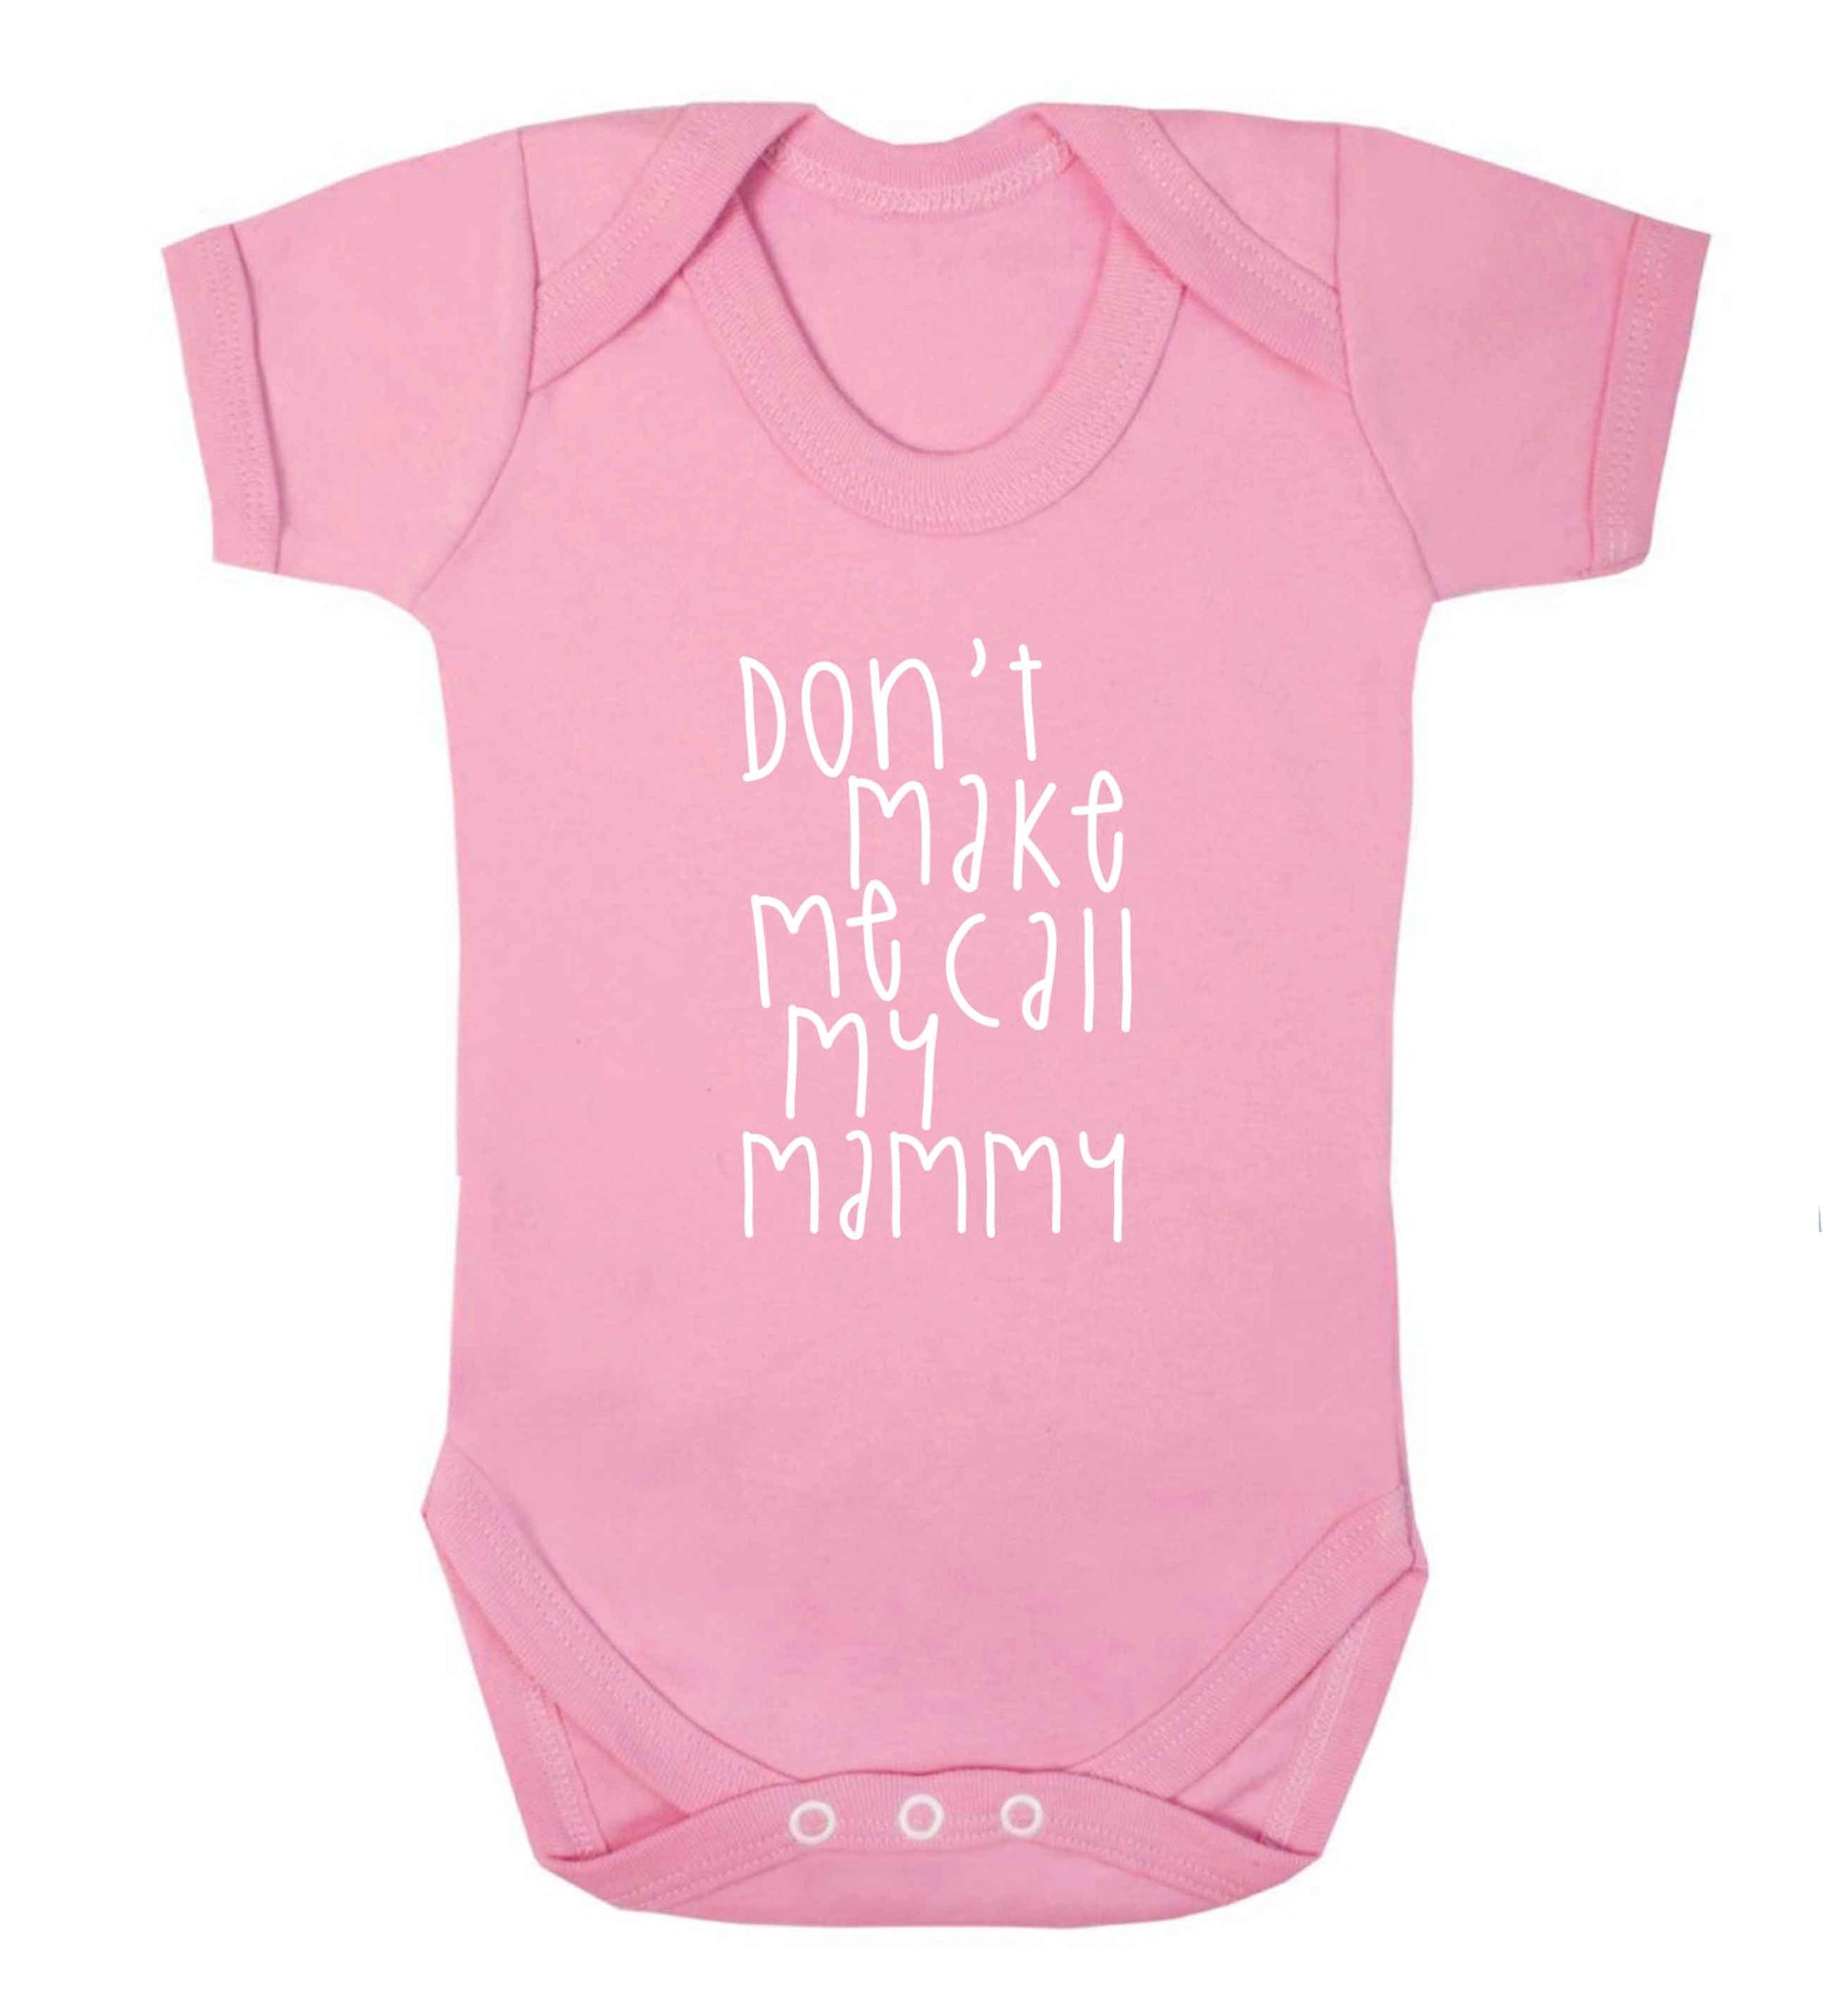 Don't make me call my mammy baby vest pale pink 18-24 months